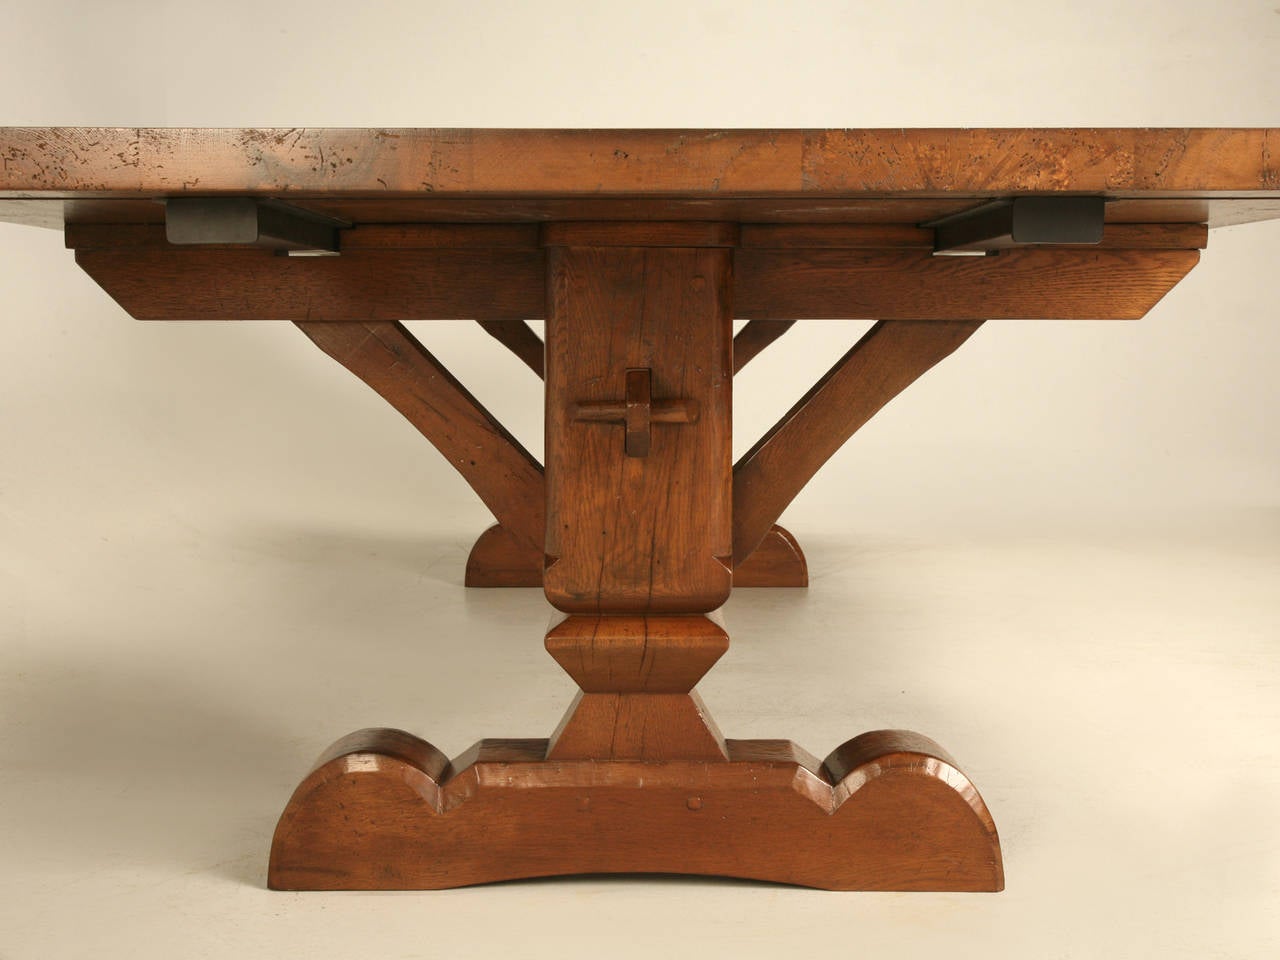 French, Louis XIV Authentic Reproduction Dining Table For Sale at 1stdibs